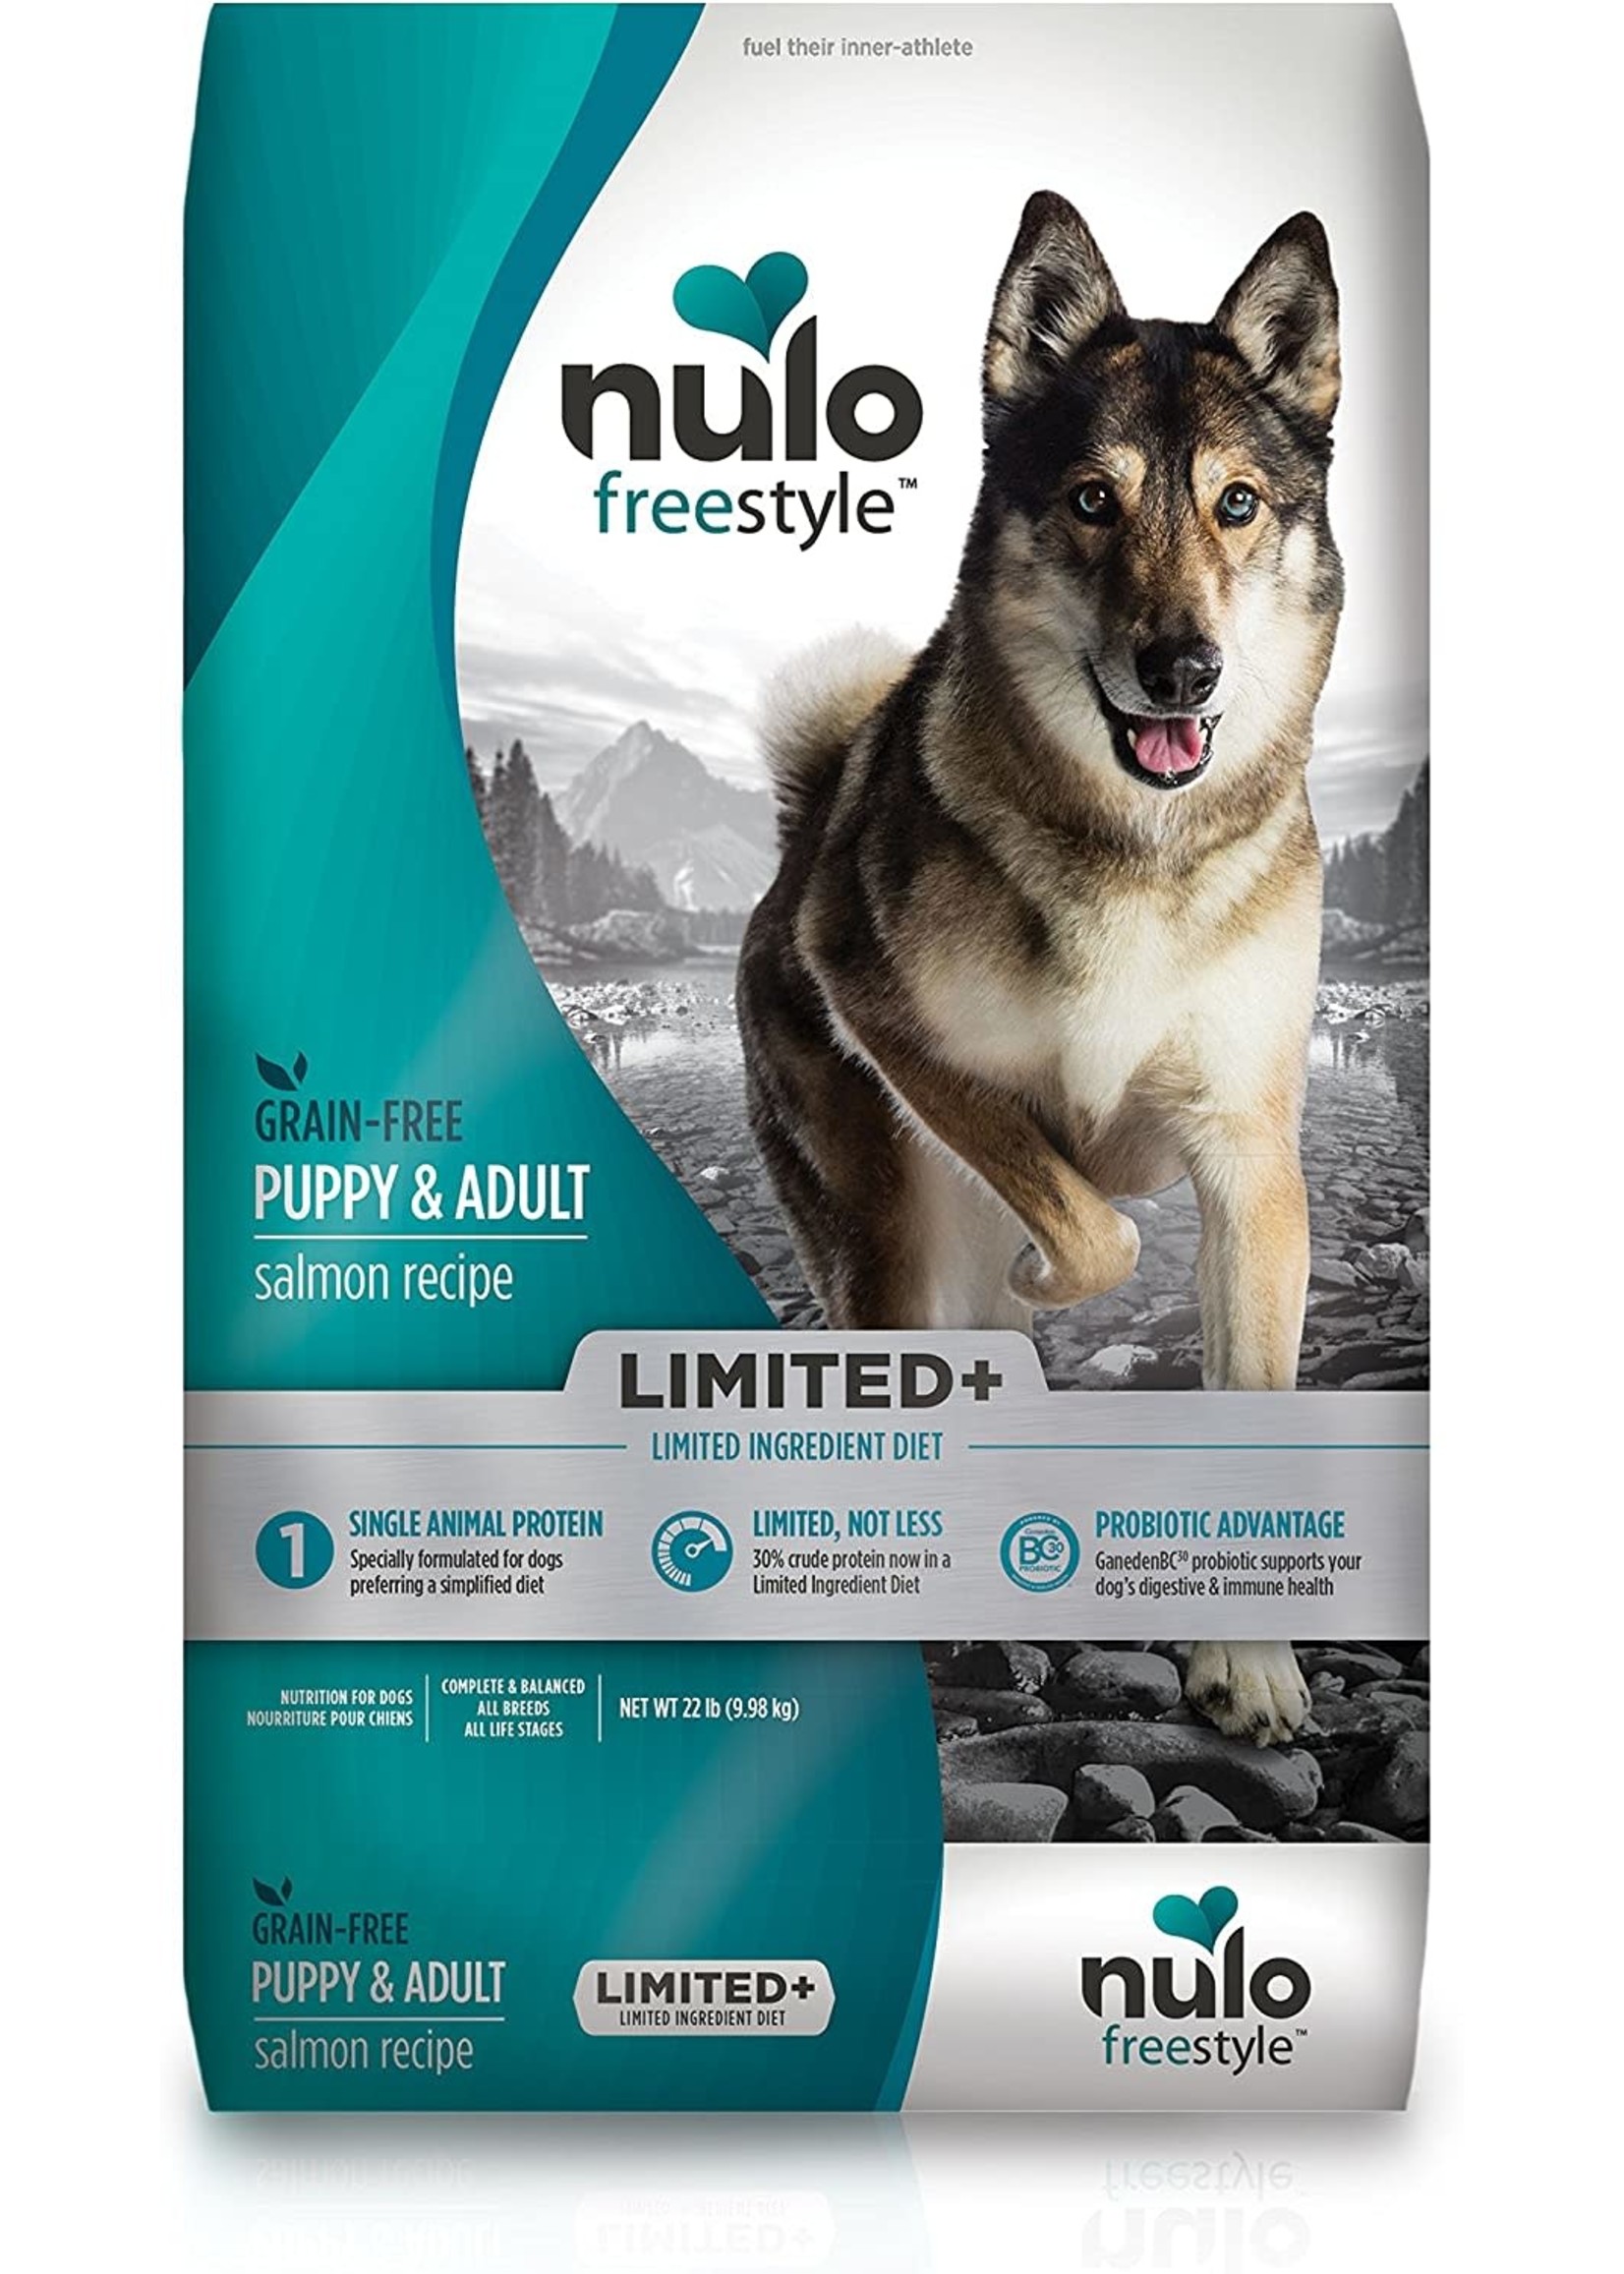 Nulo FreeStyle High-Protein Limited+ Salmon Recipe Dog Food 22 lbs